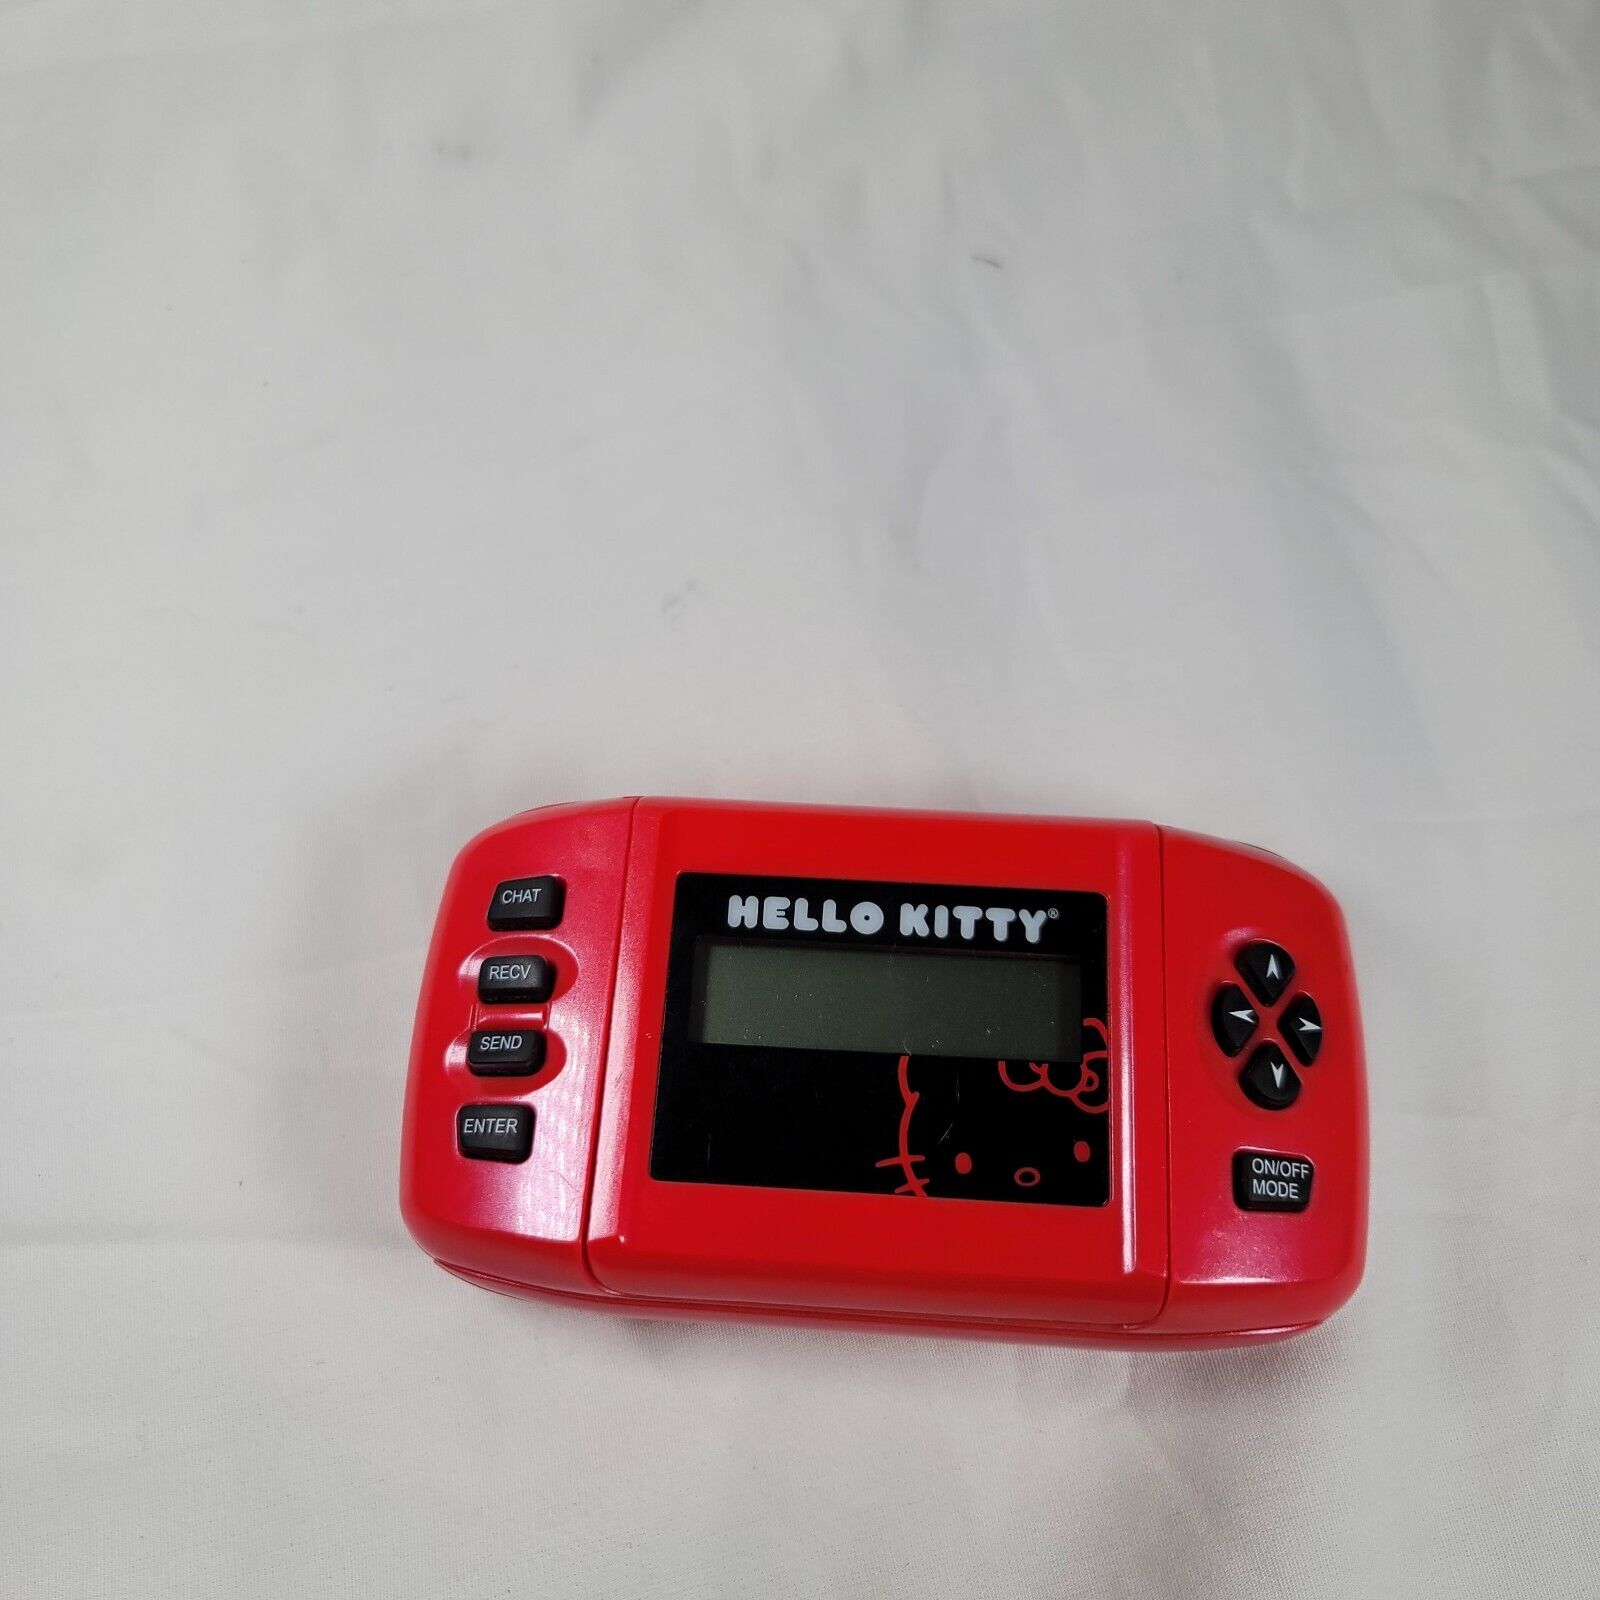 Hello Kitty By Sanrio 1976, 2012- Red Clock / Calculator / chat 4” x 2”